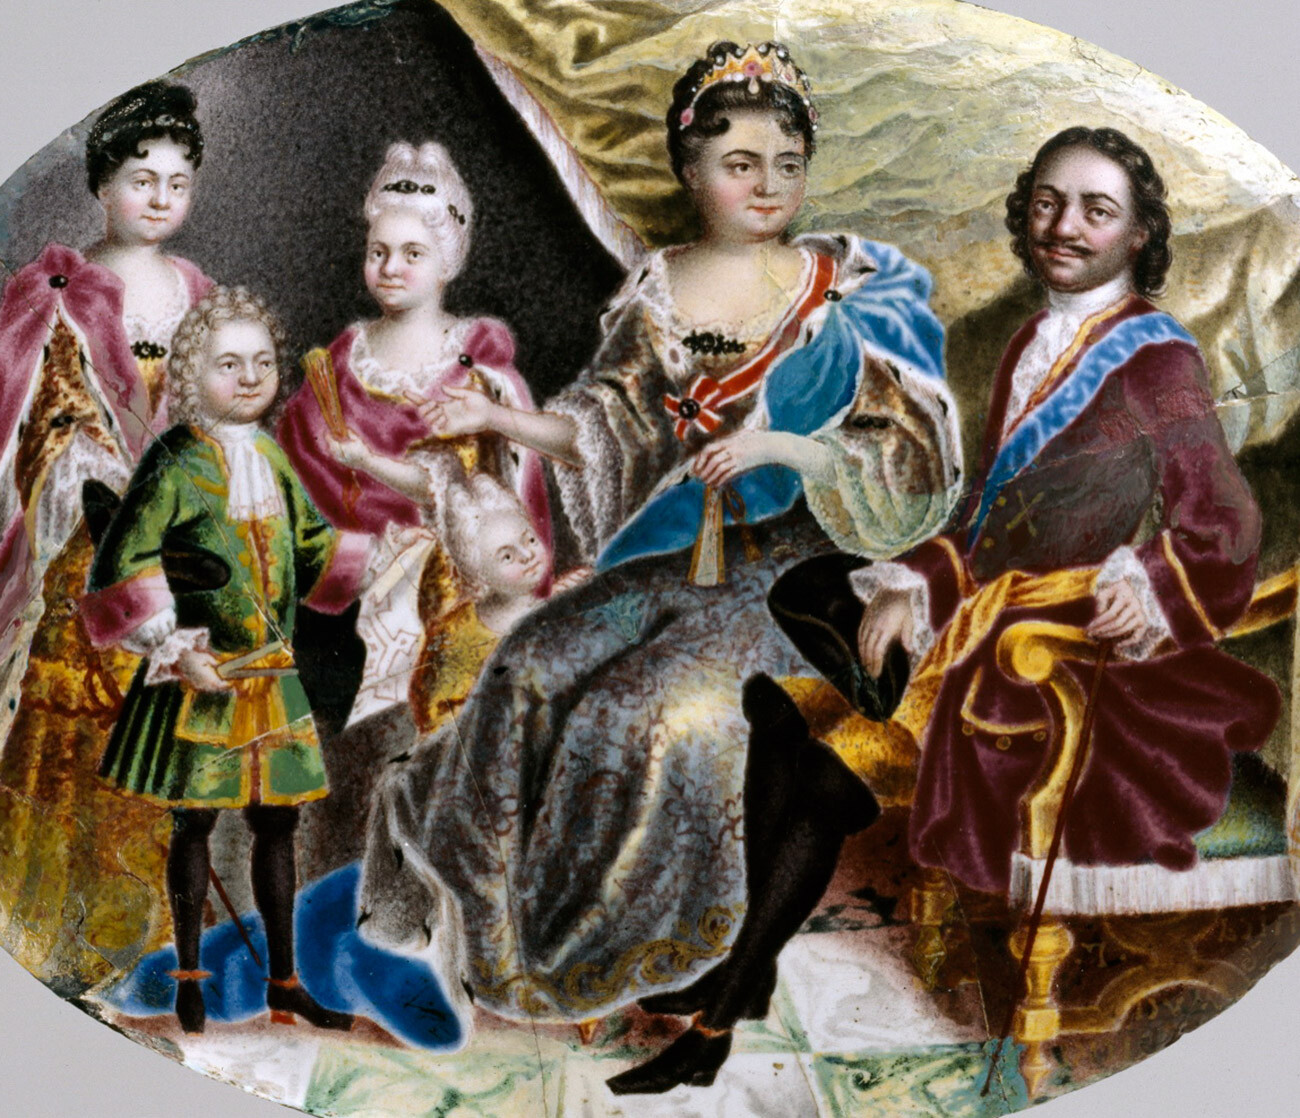 Peter the Great (right) depicted together with his wife Catherine, his three daughters Anna, Elizabeth, and Natalia, and his grandson Peter